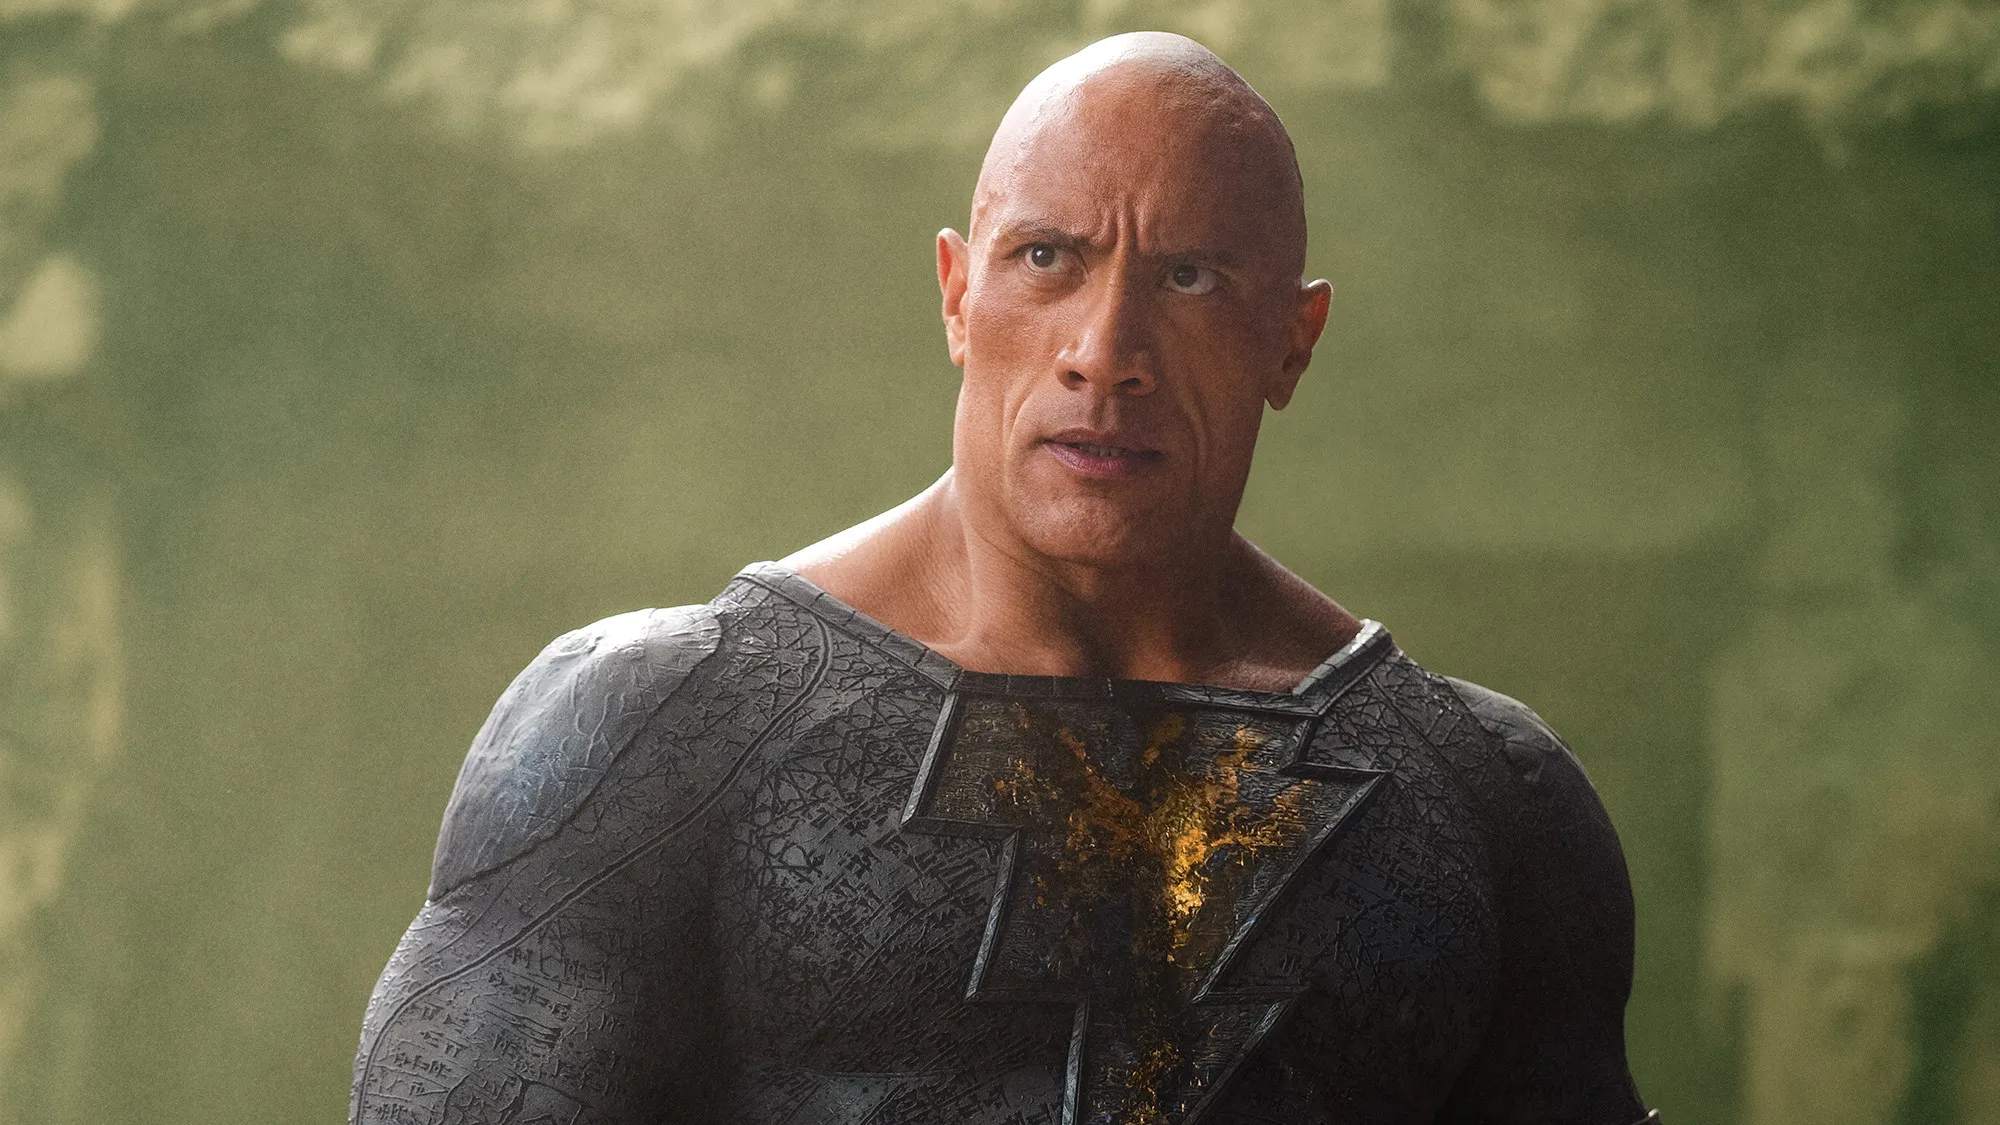 'Black Adam' Northern America grosses $7.6 million Thursday, predicts over $60 million in opening weekend | FMV6